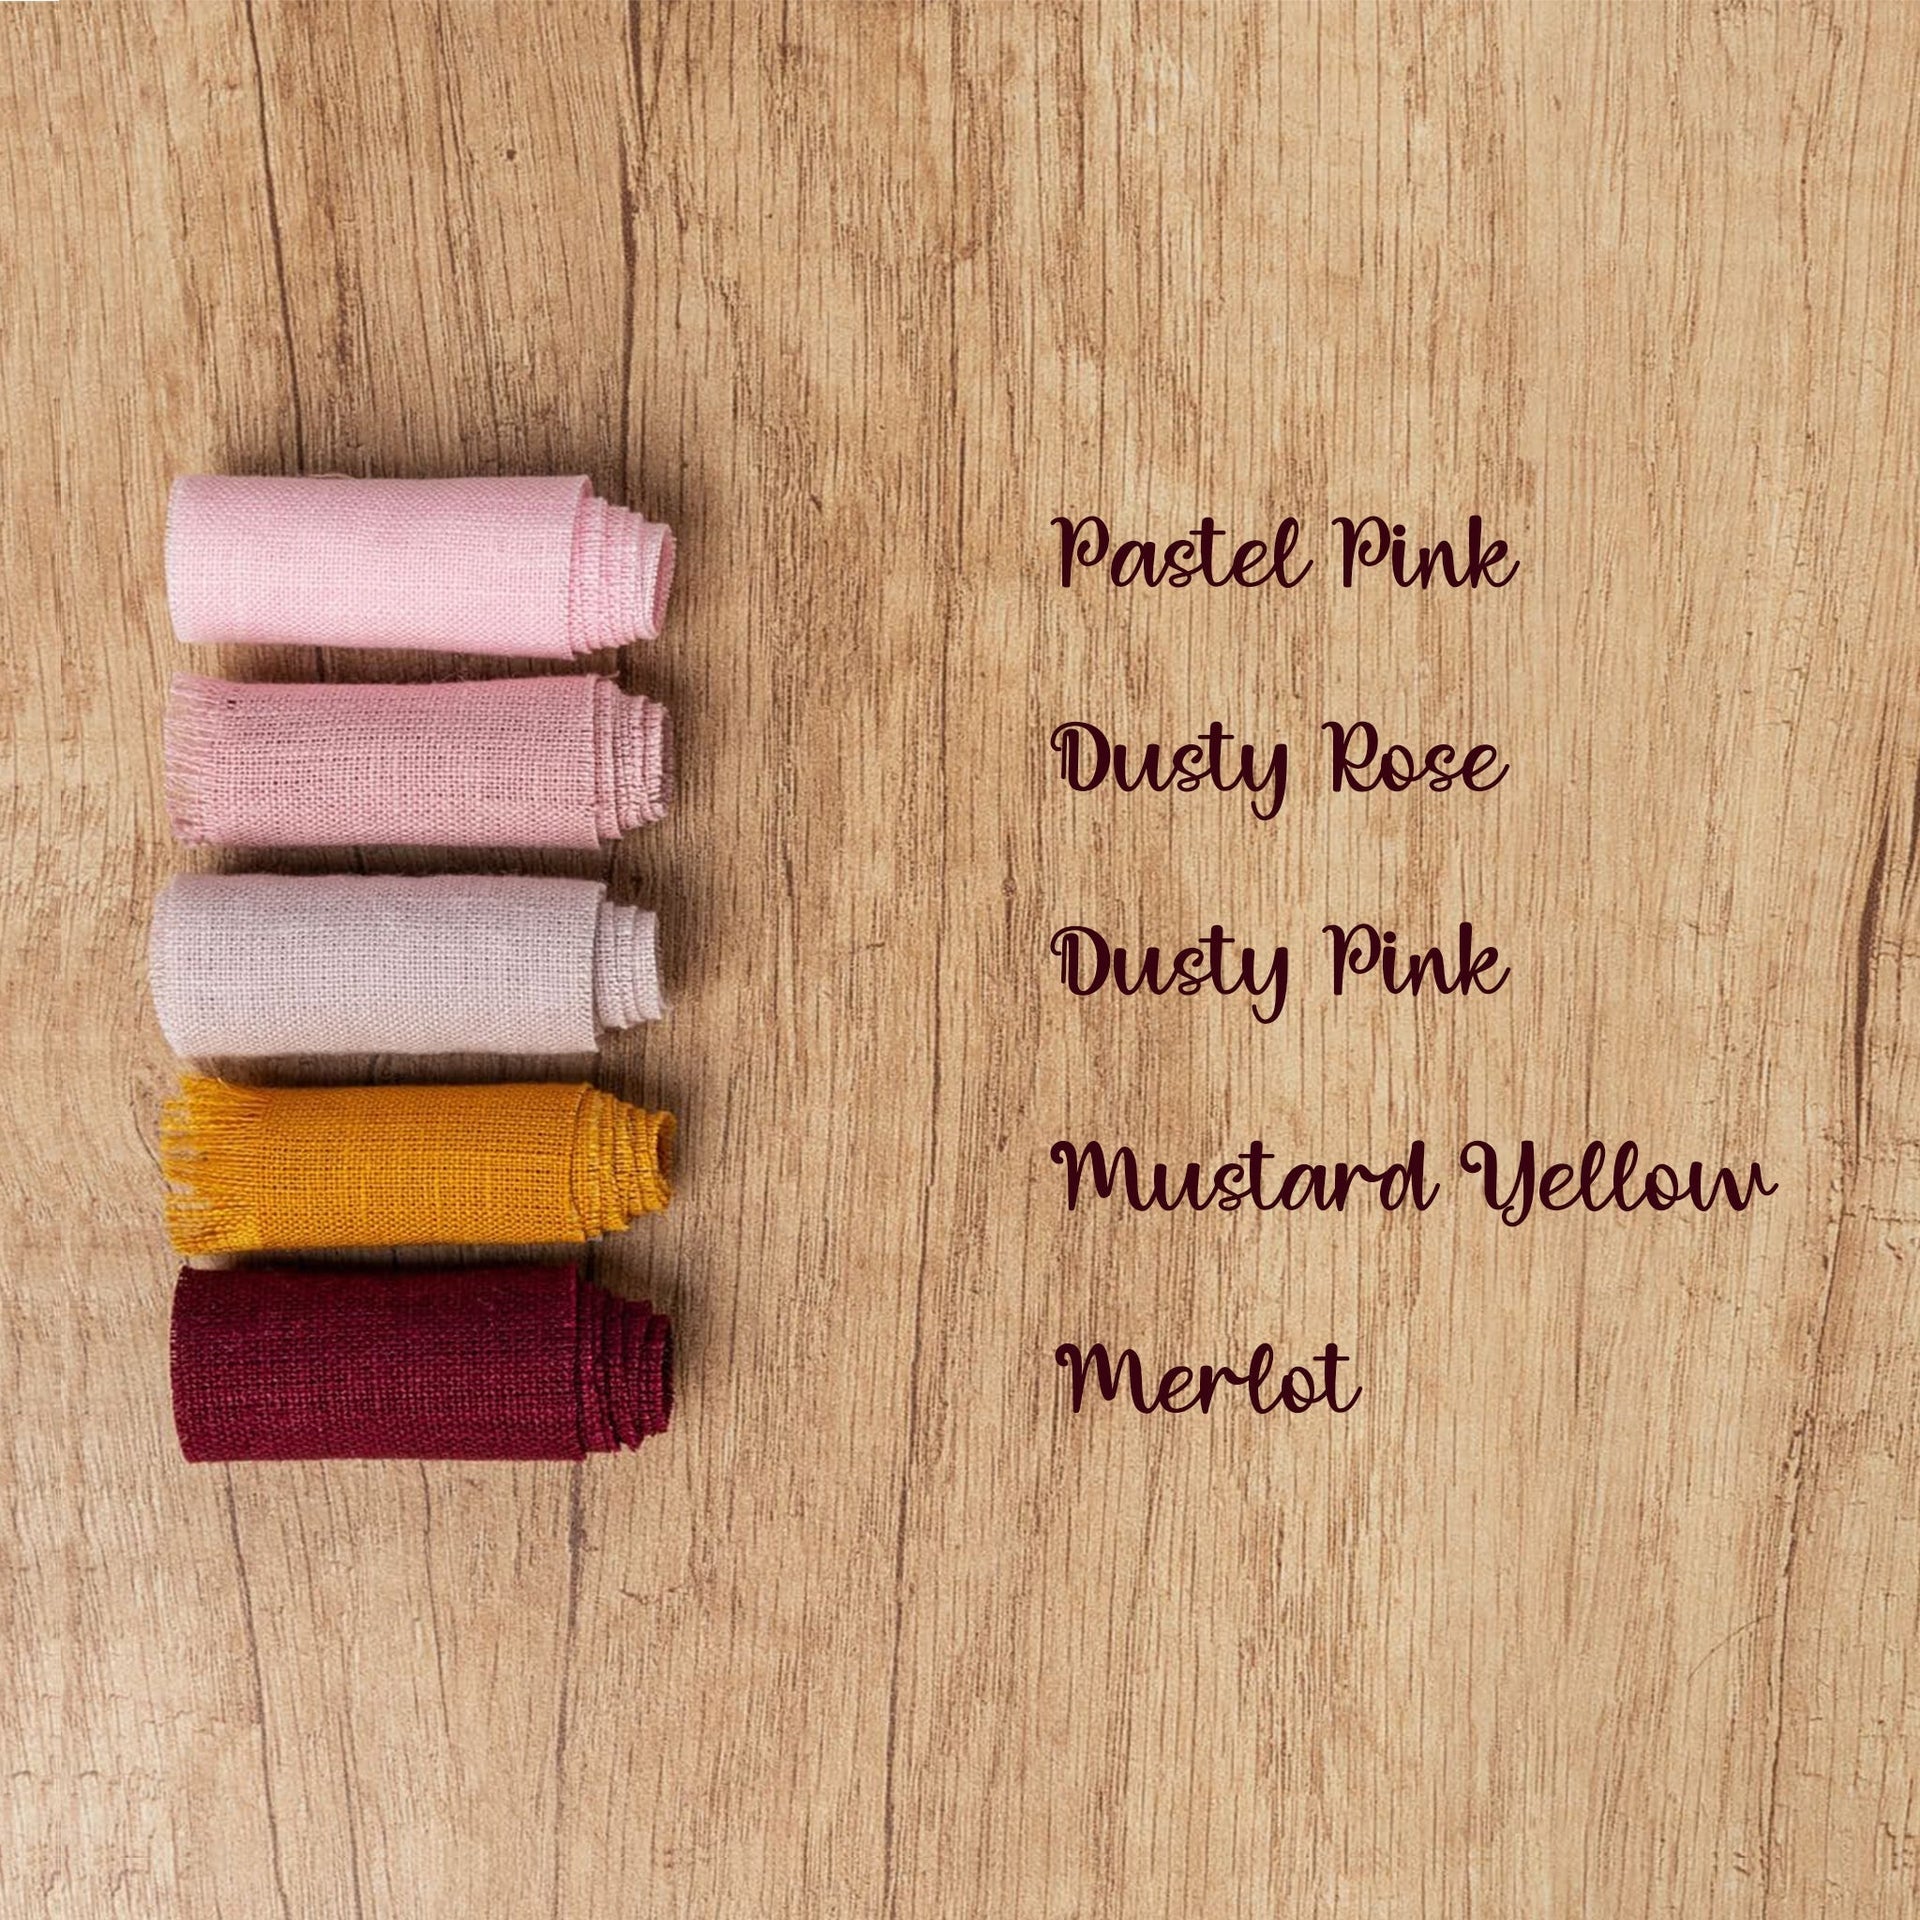 @colour:Mustard Yellow,colour:Dusty Pink,colour:Dusty Rose, colour:Pastel Pink, colour:Merlot